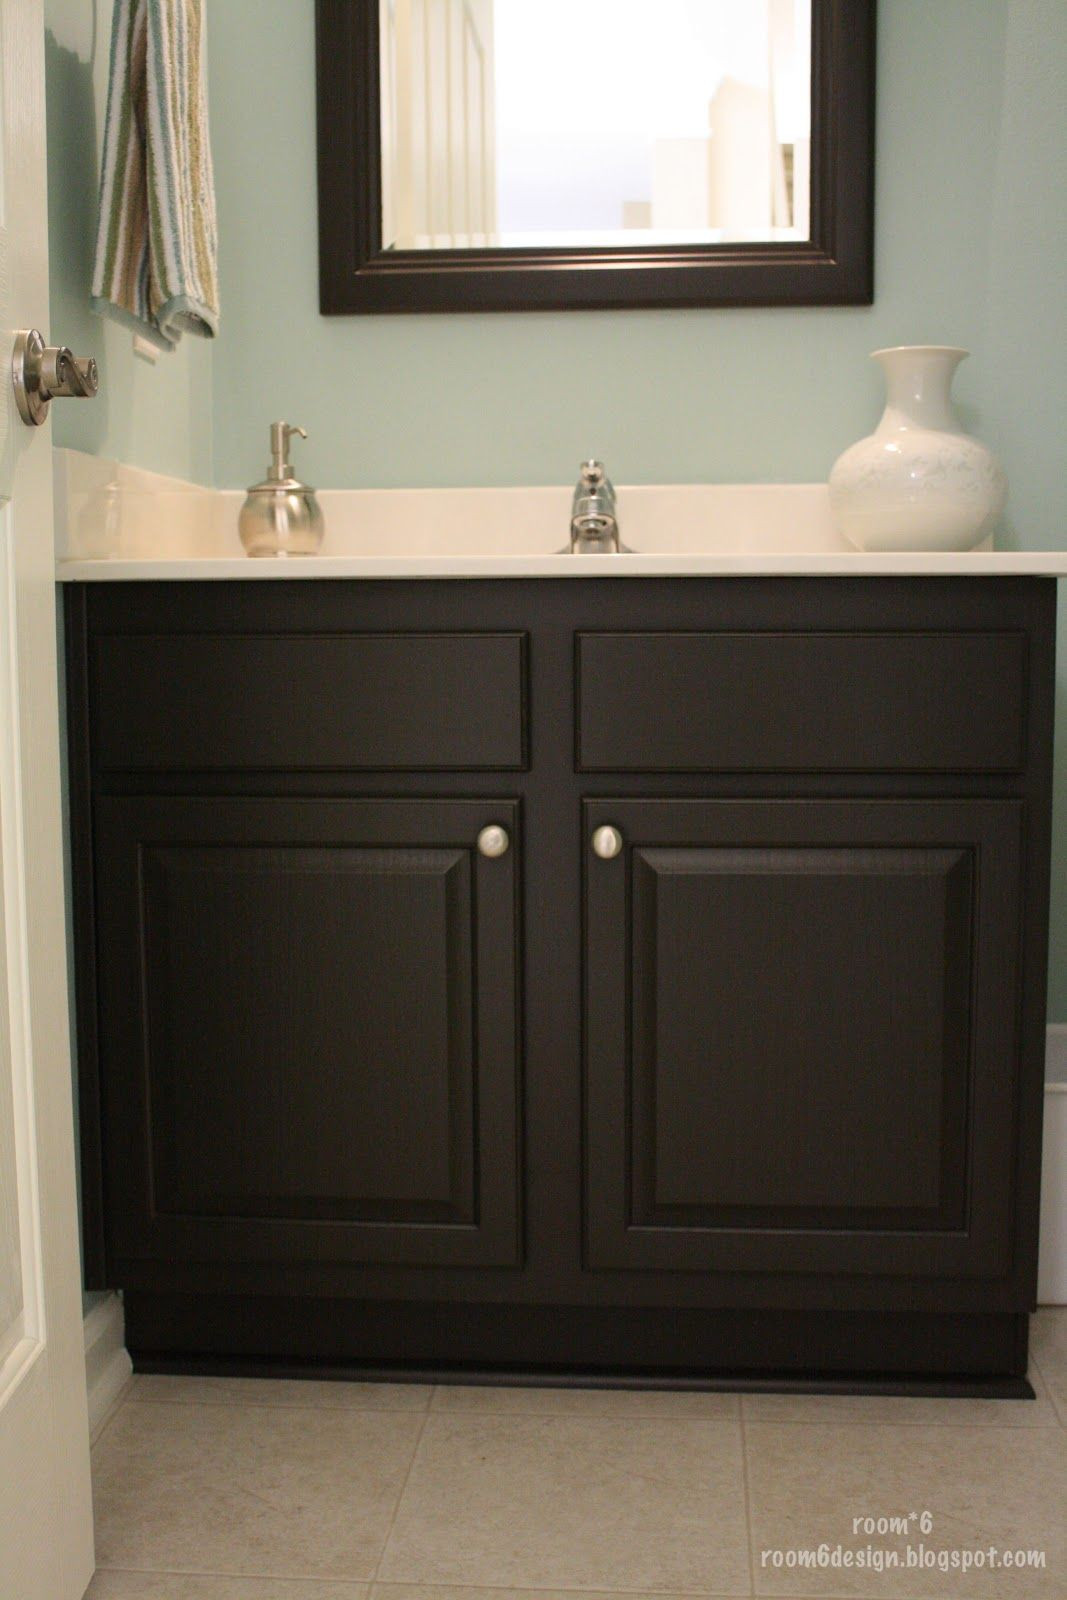 Painting Bathroom Cabinets Color Ideas
 Oh I want to paint our bathroom cabinet